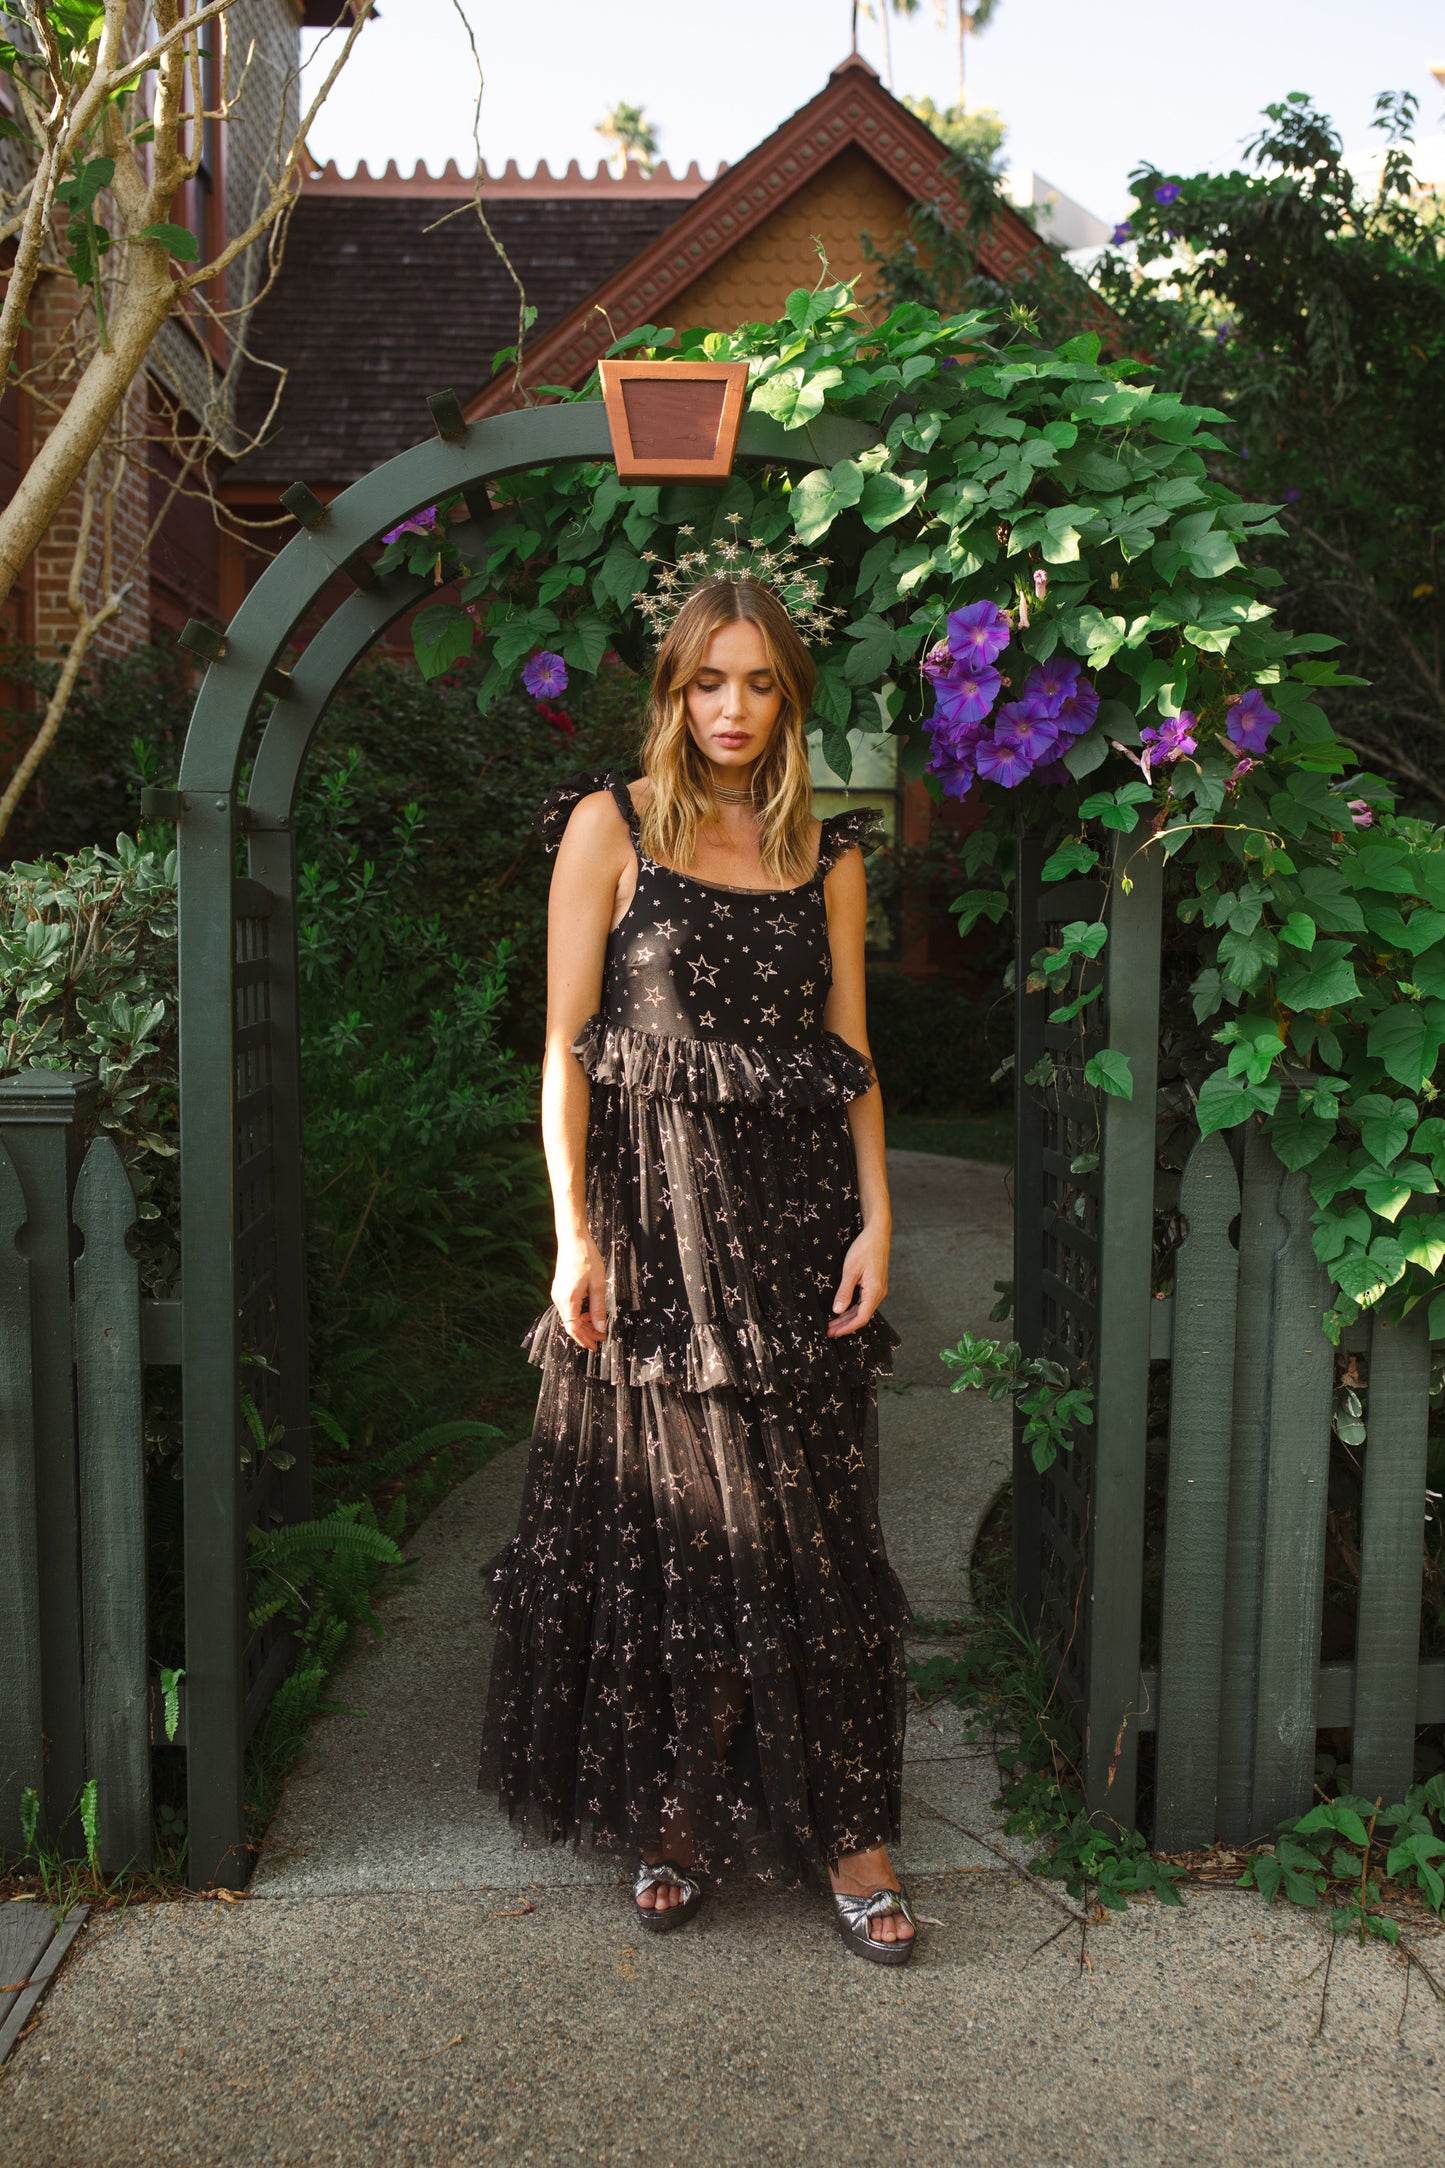 jennafer grace Midnight Sky Tulle Maxi Dress black semi-sheer lined layered tulle maxi dress with metallic gold foil star print ruffle straps starry gothic boho bohemian hippie dark romantic whimsical evening gown cocktail party statement piece handmade in California USA